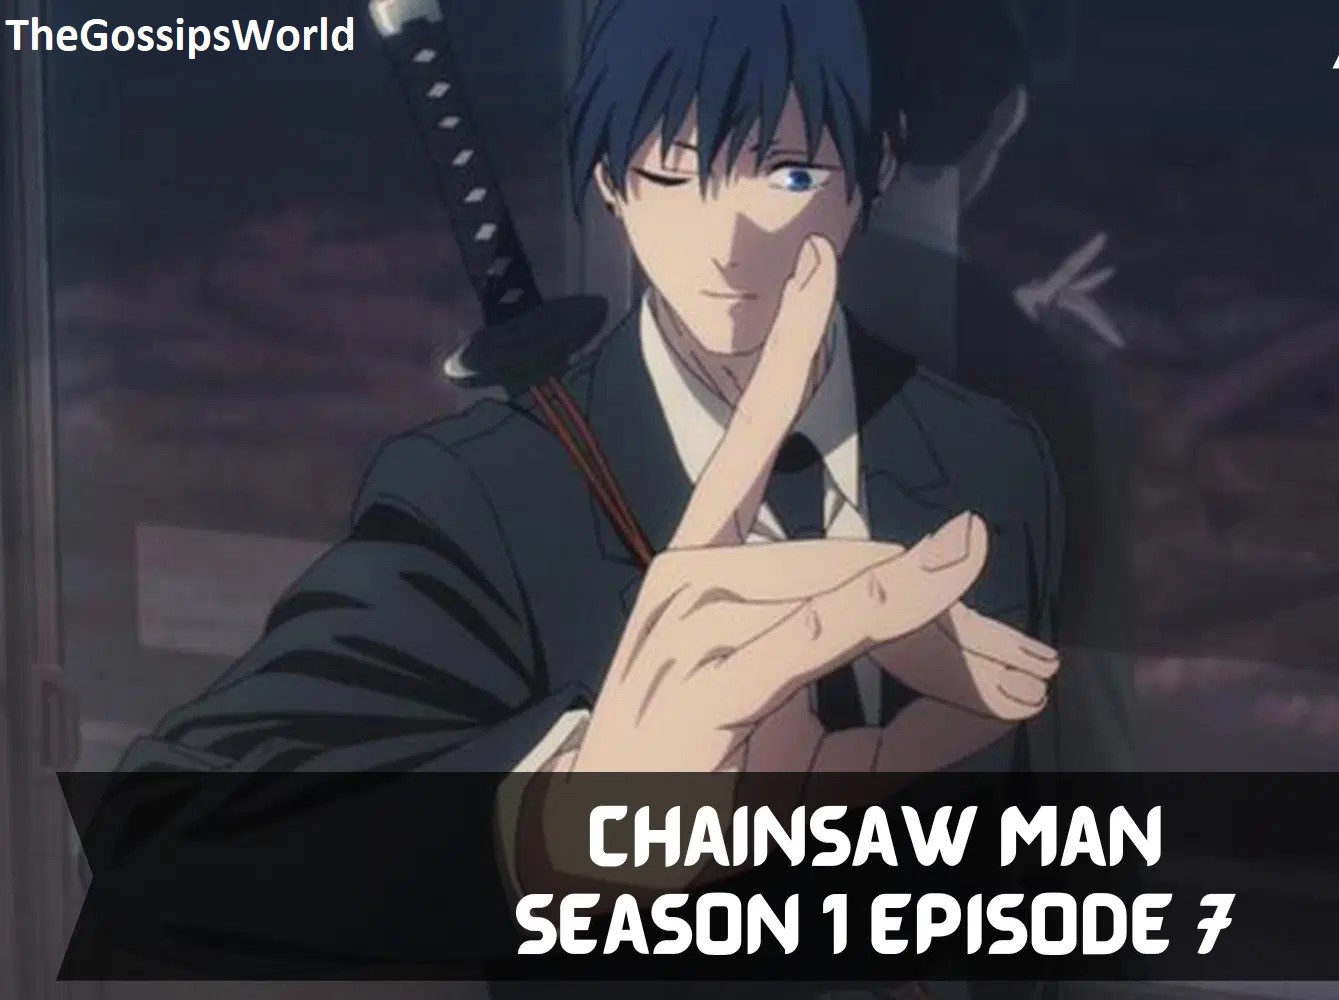 When Will Chainsaw Man Episode 7 Be Released?